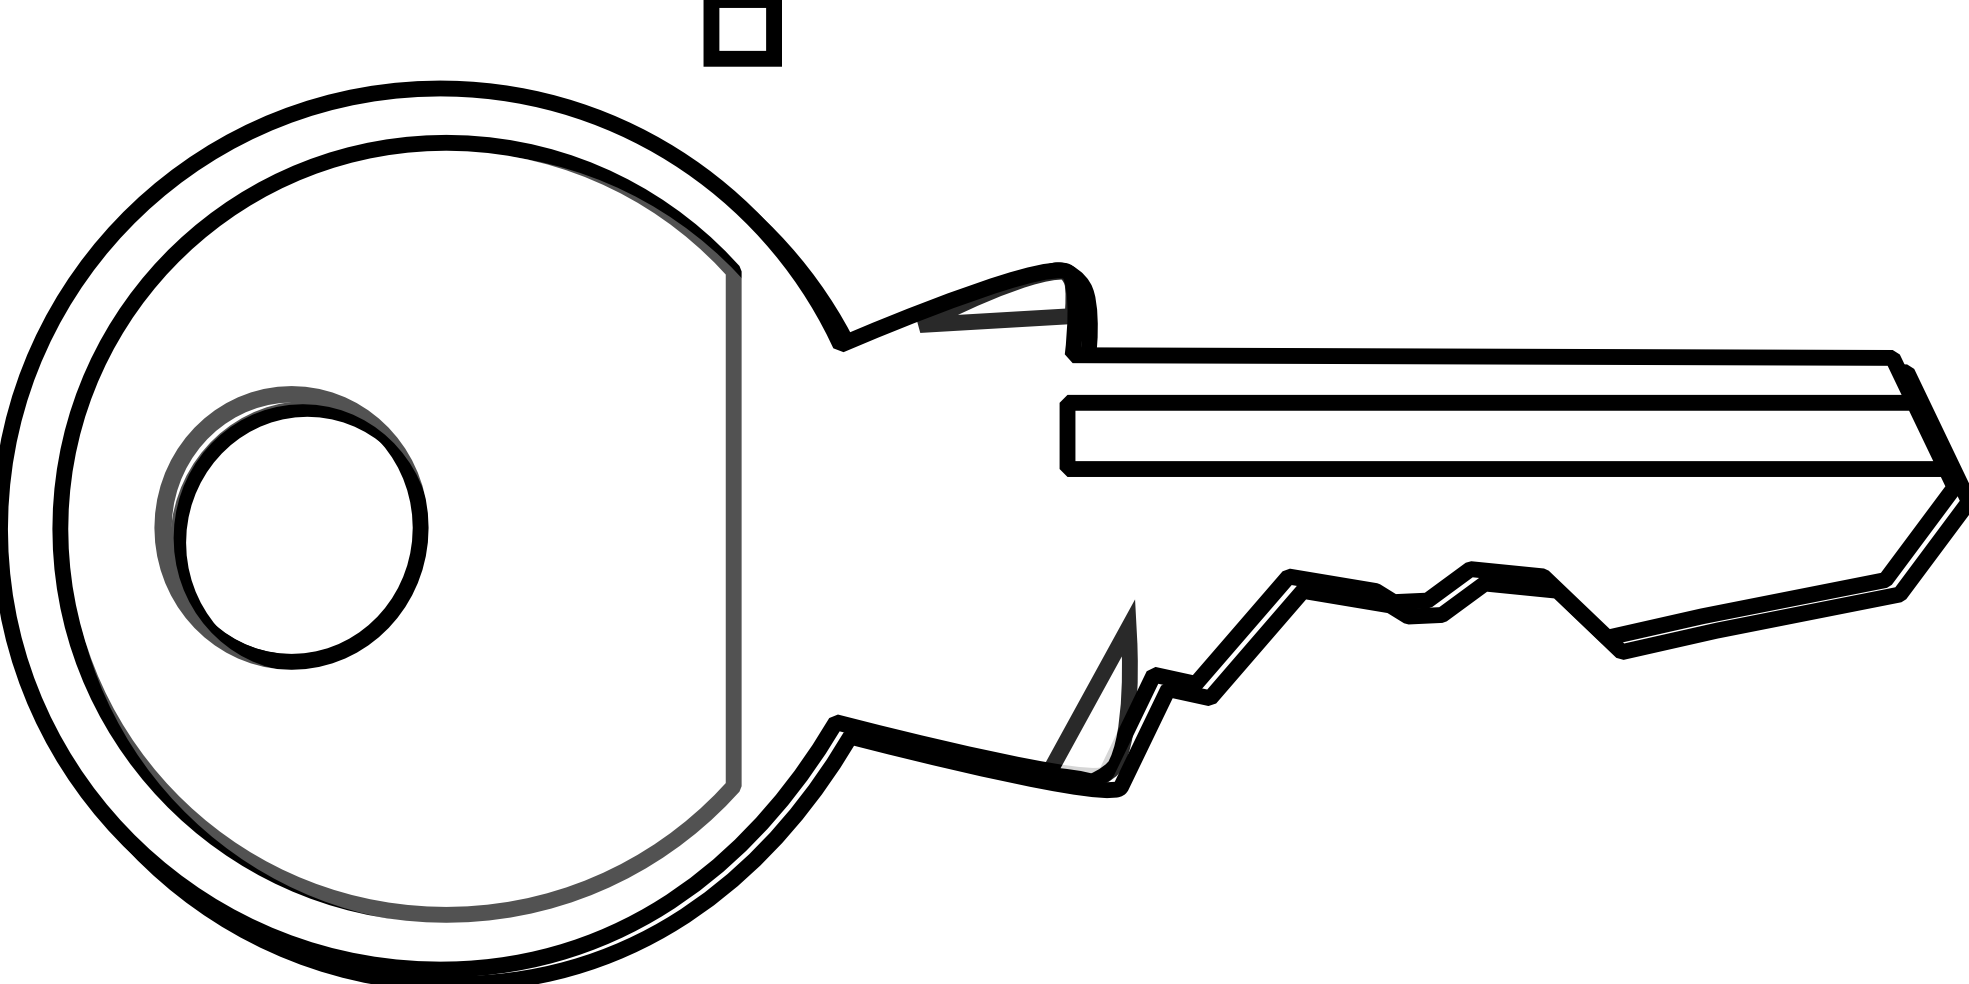 Key Clipart Black And White - Keys Black And White, Transparent background PNG HD thumbnail